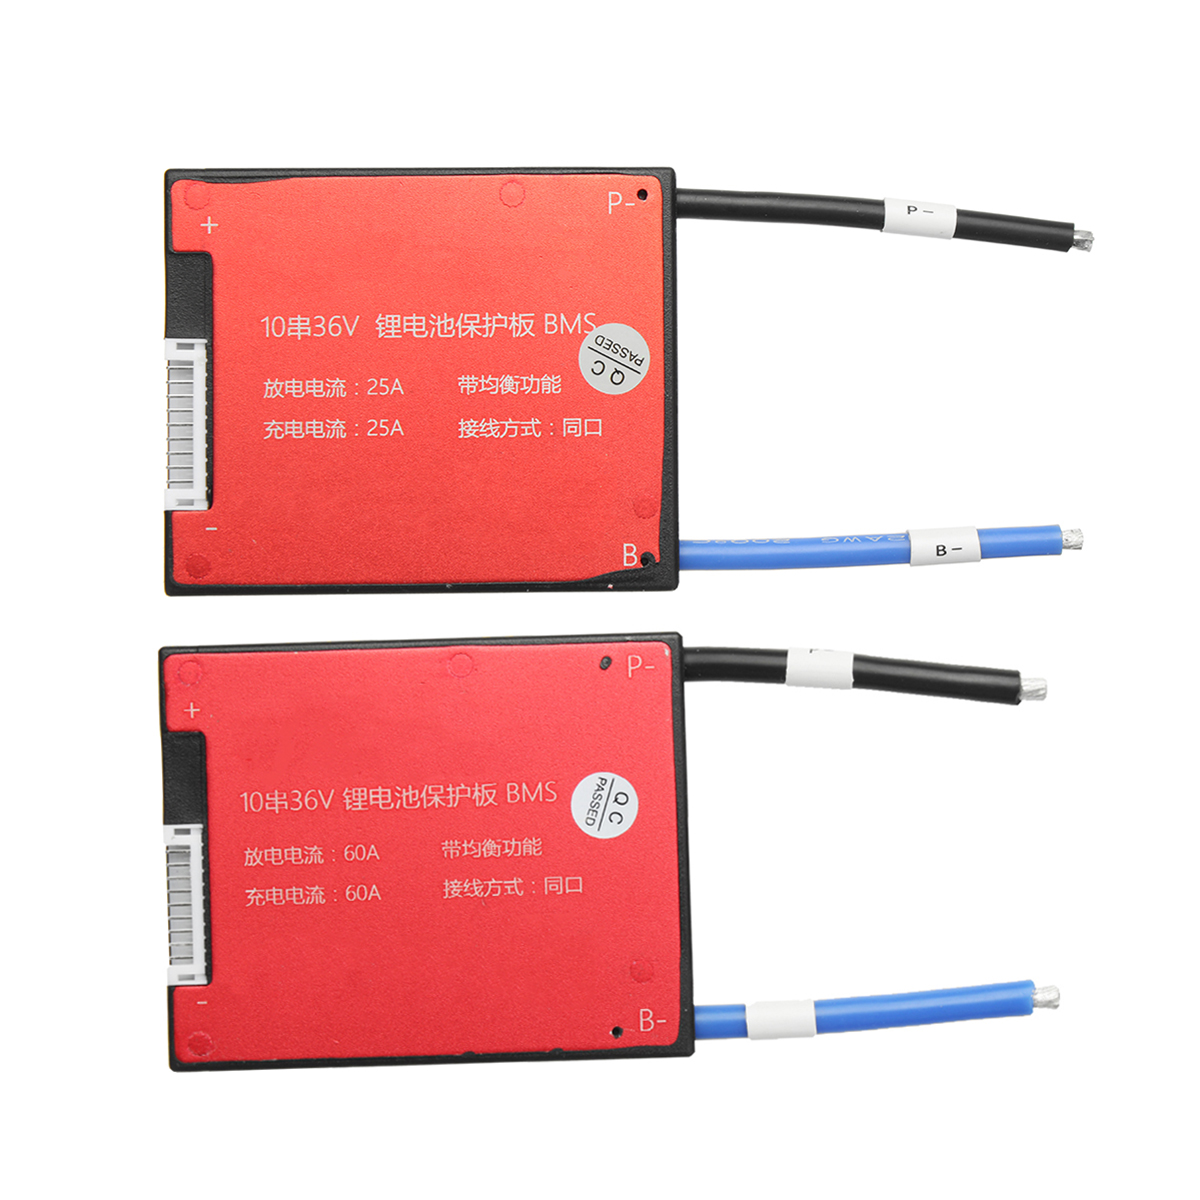 

36V 10S Li-ion Lipolymer Battery 25A 60A BMS Battery Protection Board for Ebike Ebicycle